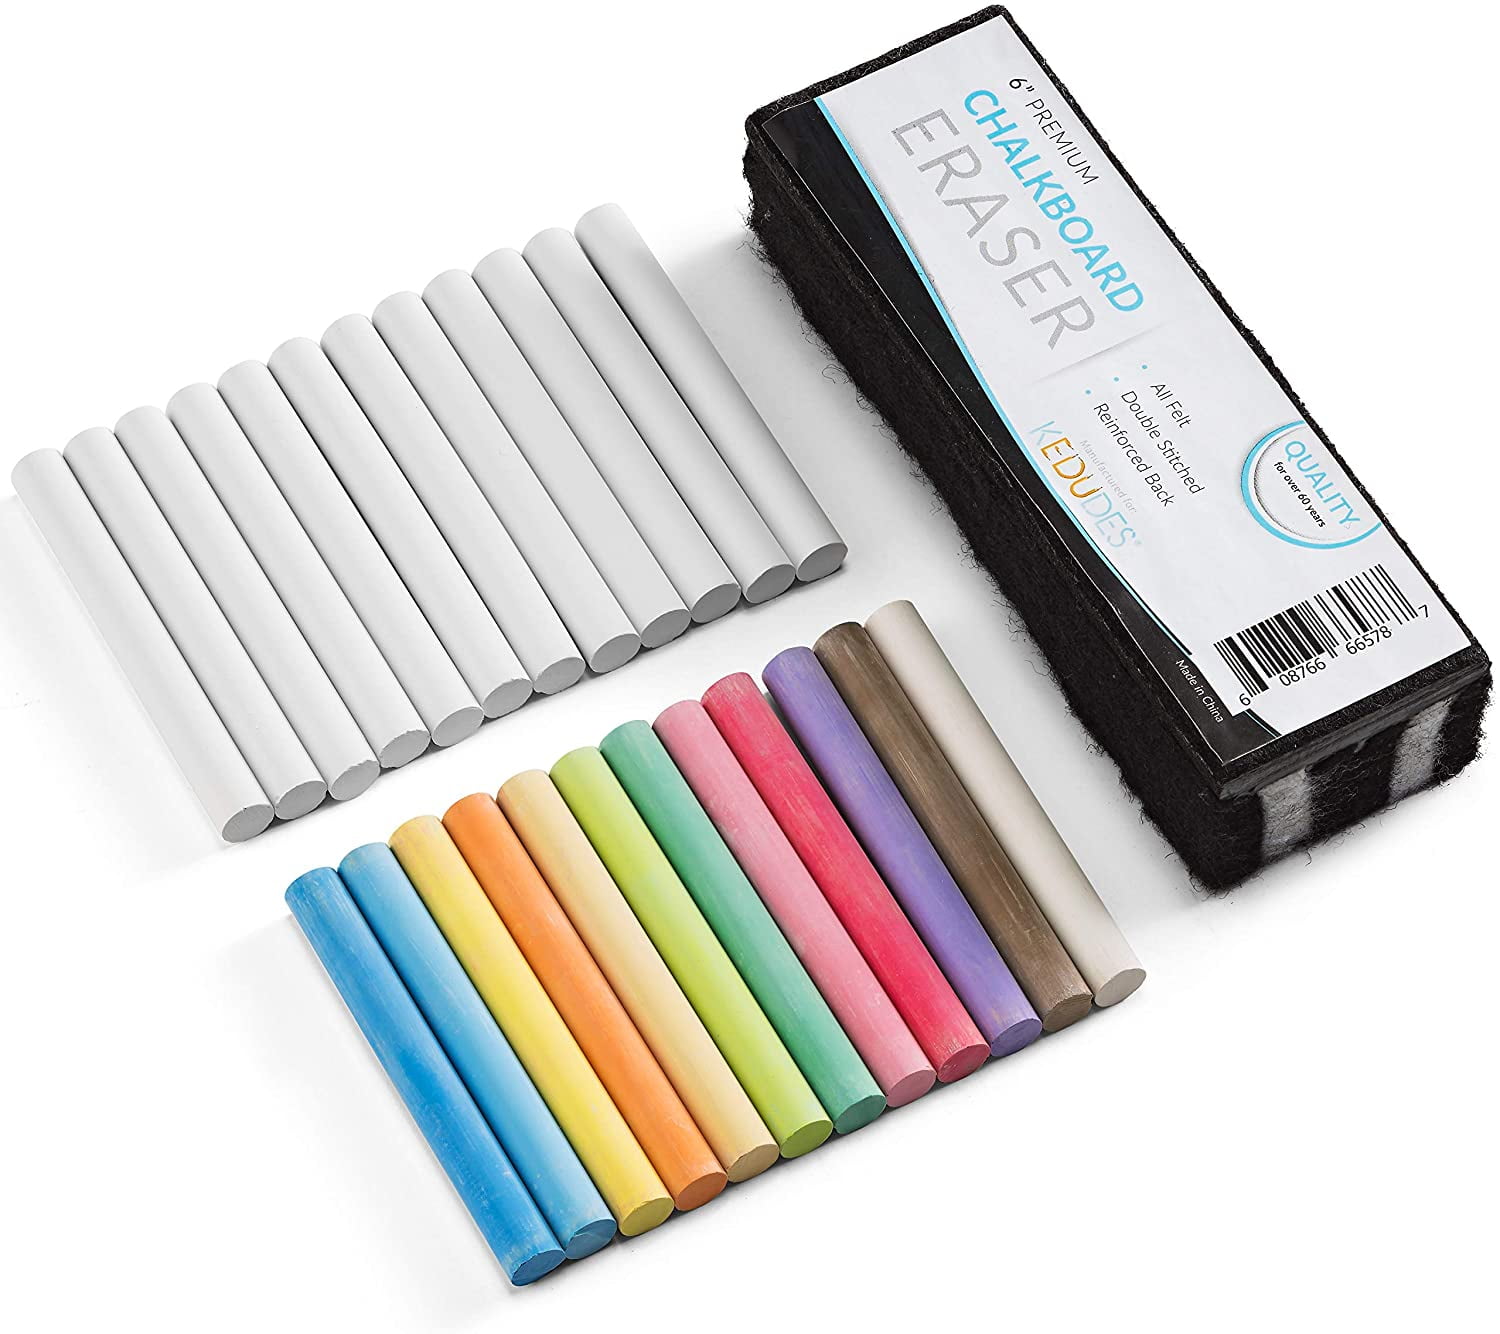 Sargent Art Dustless Chalkboard Chalk, Assorted Colors, 12 Per Box, 24  Boxes at